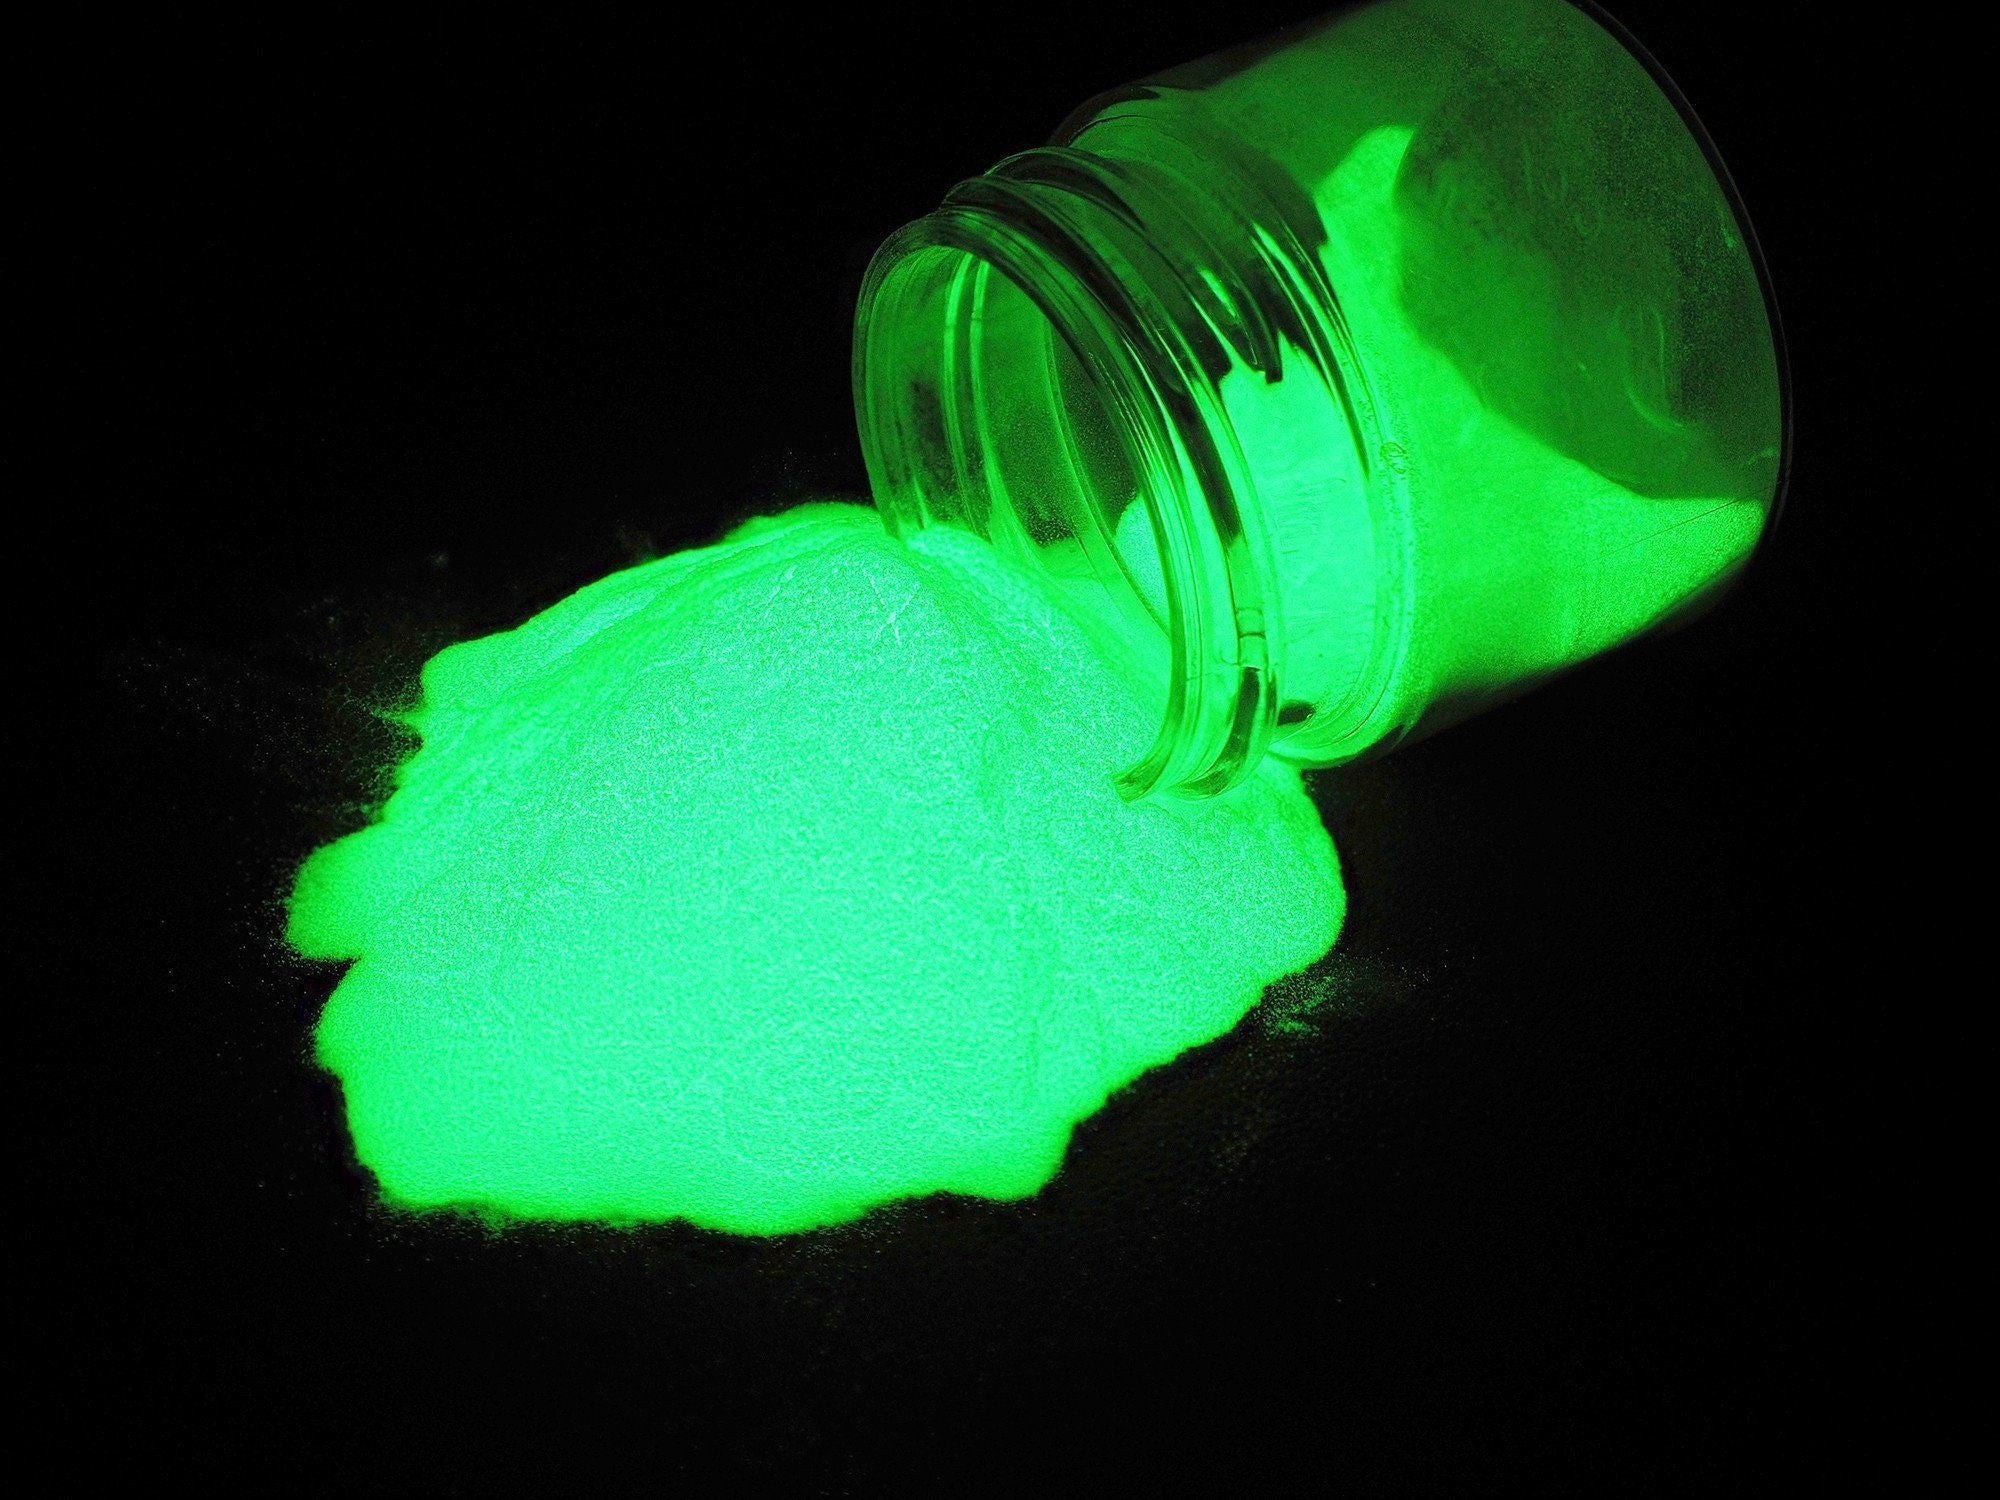 New Products Photoluminescent Pigment and Glow in The Dark Pigment